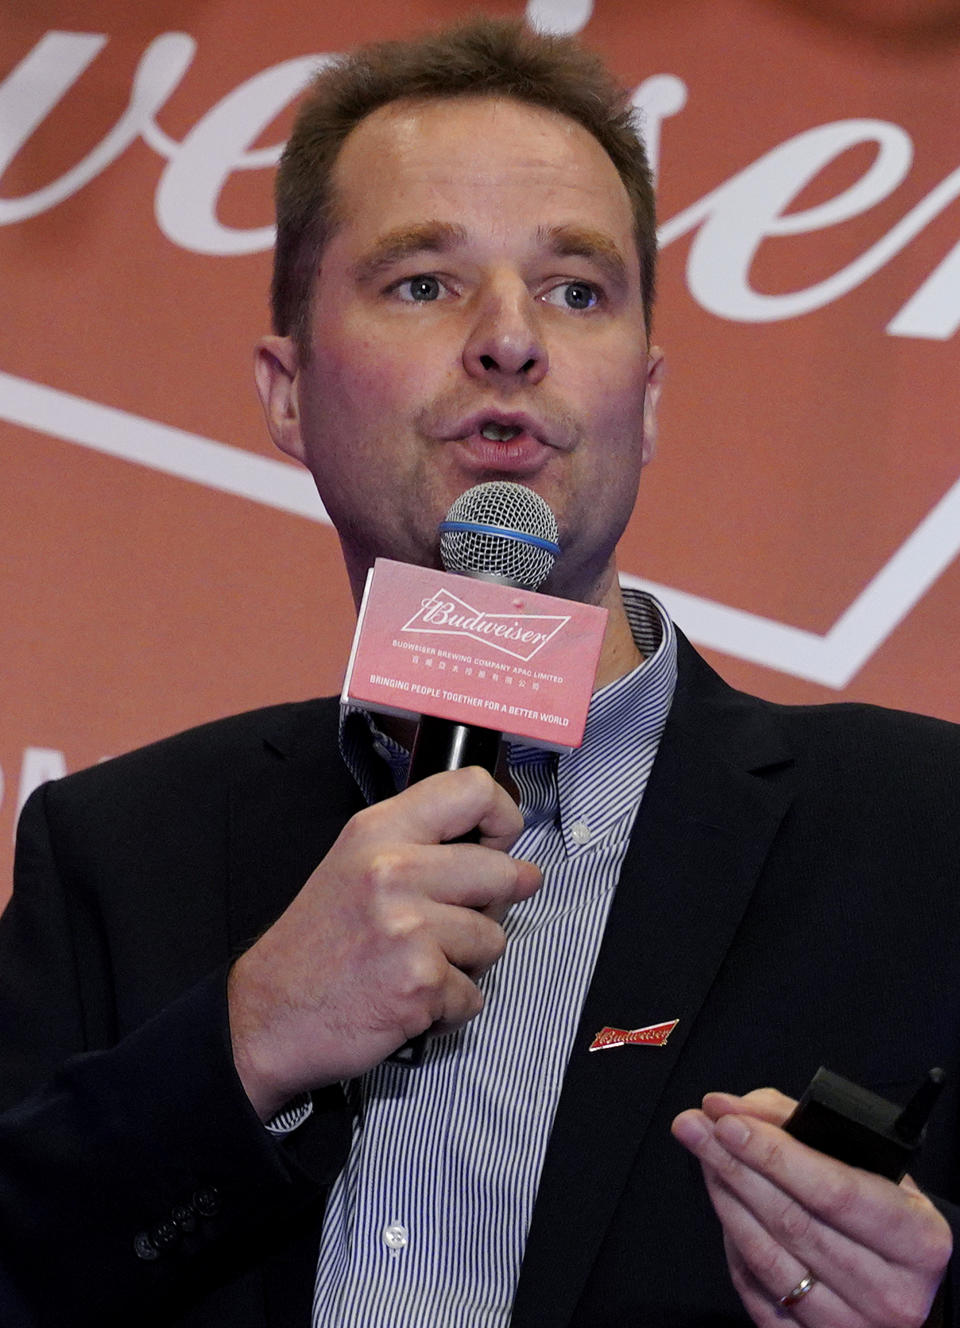 Jan Craps, Executive Director and CEO of Budweiser Brewing Company APAC Limited speaks during a press conference in Hong Kong Tuesday, Sept. 17, 2019. AB InBev, the world's largest brewer that produces Budweiser and Corona, has revived plans to list its Asian business in Hong Kong despite persistent pro-democracy protests but halved the size of its initial public offering. (AP Photo/Vincent Yu)